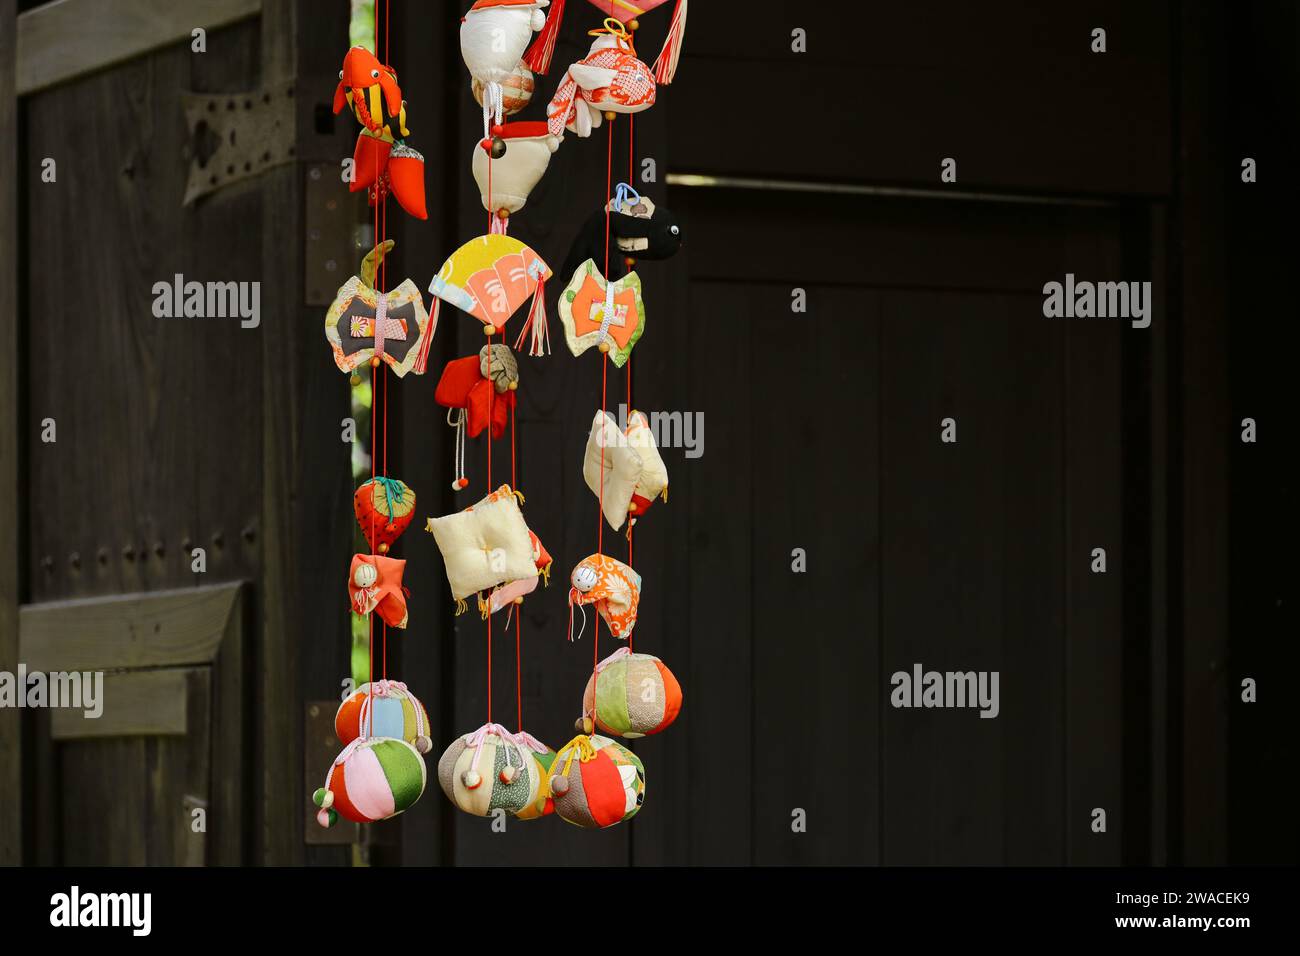 Japanese scenery  Hanging ornamental dolls in front of the gate decorated for the Doll's Festival called "Hina Matsuri", which is a festival to pray f Stock Photo